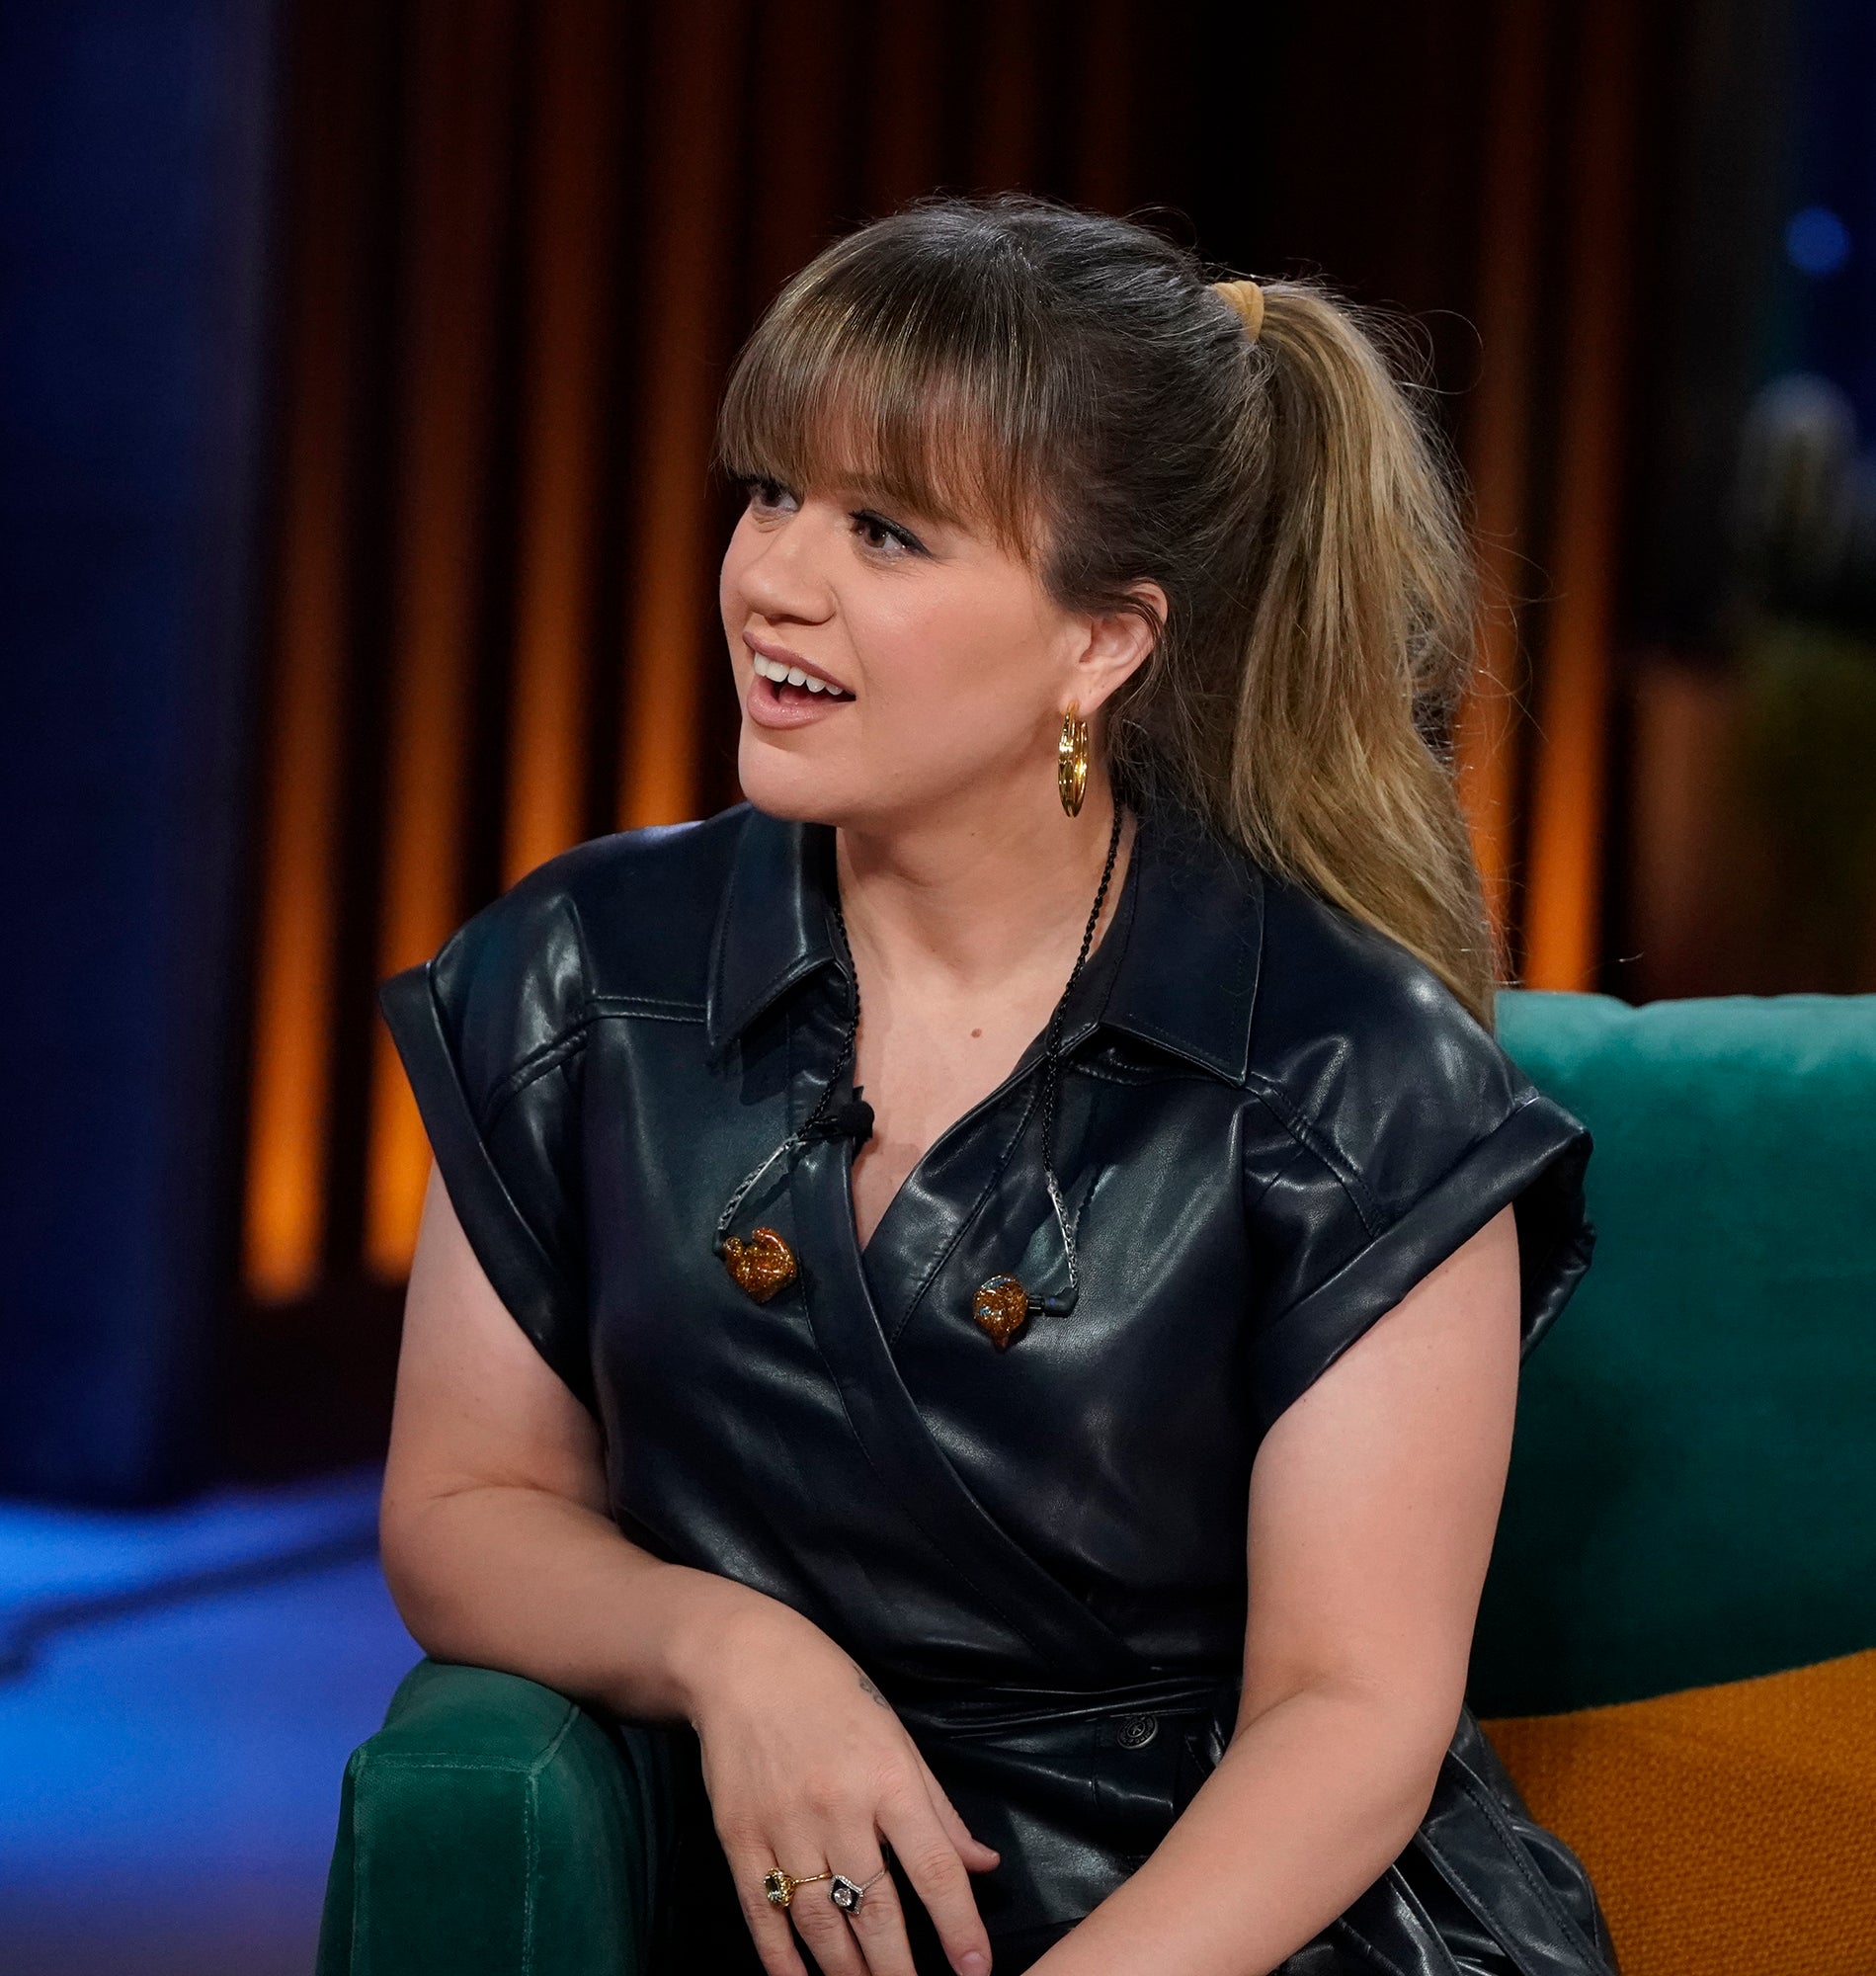 Kelly in a leather dress seated with a ponytail, on a talk show set